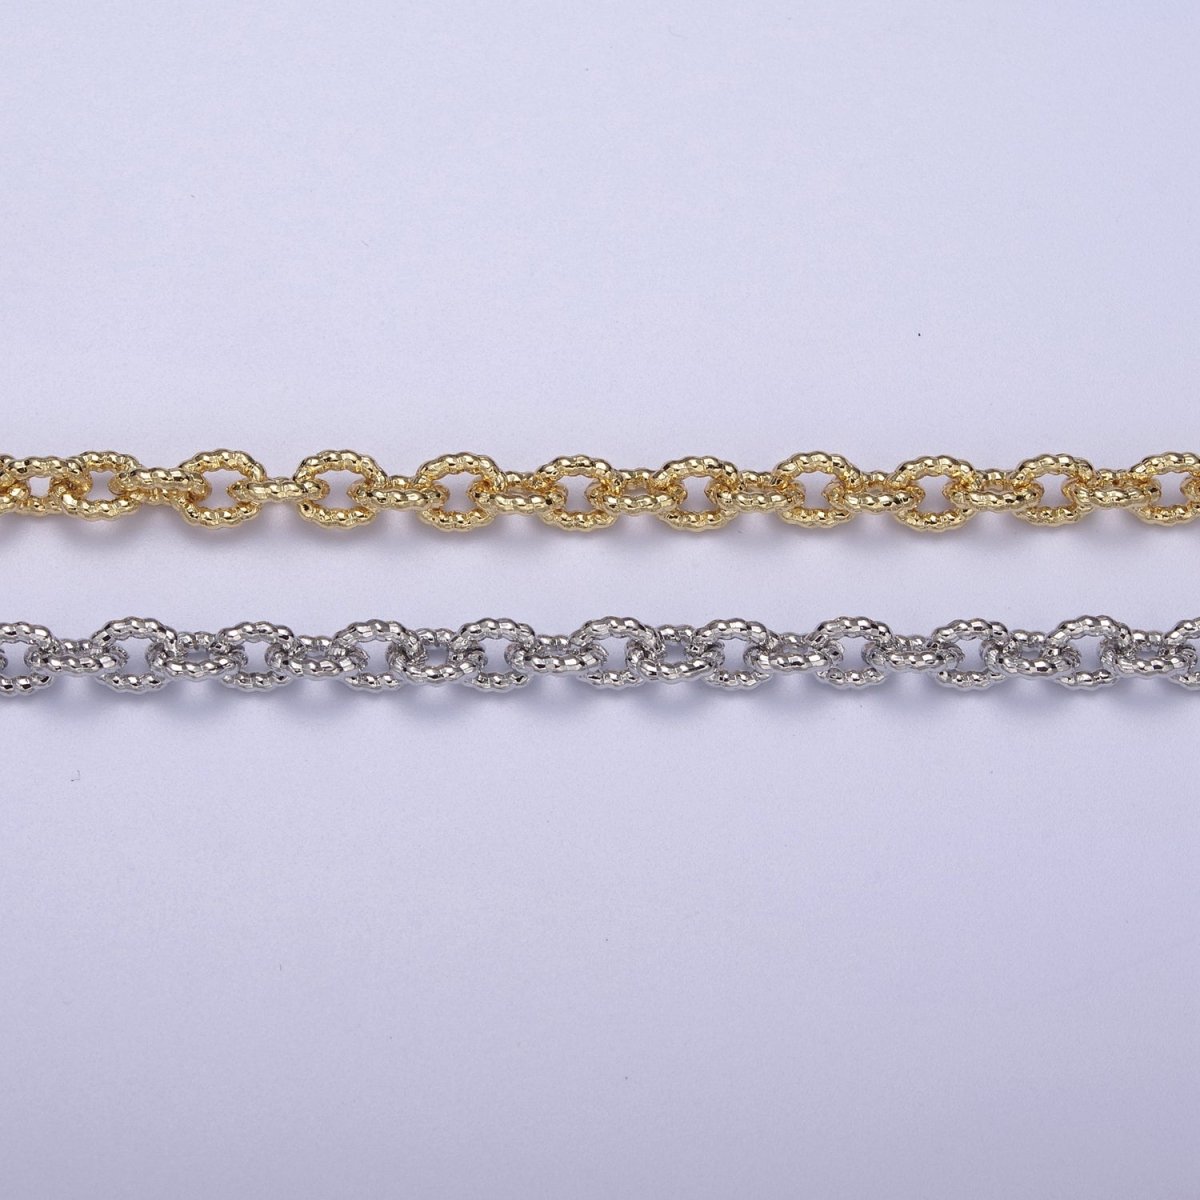 24K Gold Filled Textured Cable Chain, 6.5X5mm Unfinished Unique Chain in Gold & Silver For Jewelry Making | ROLL-668, ROLL-669 Clearance Pricing - DLUXCA